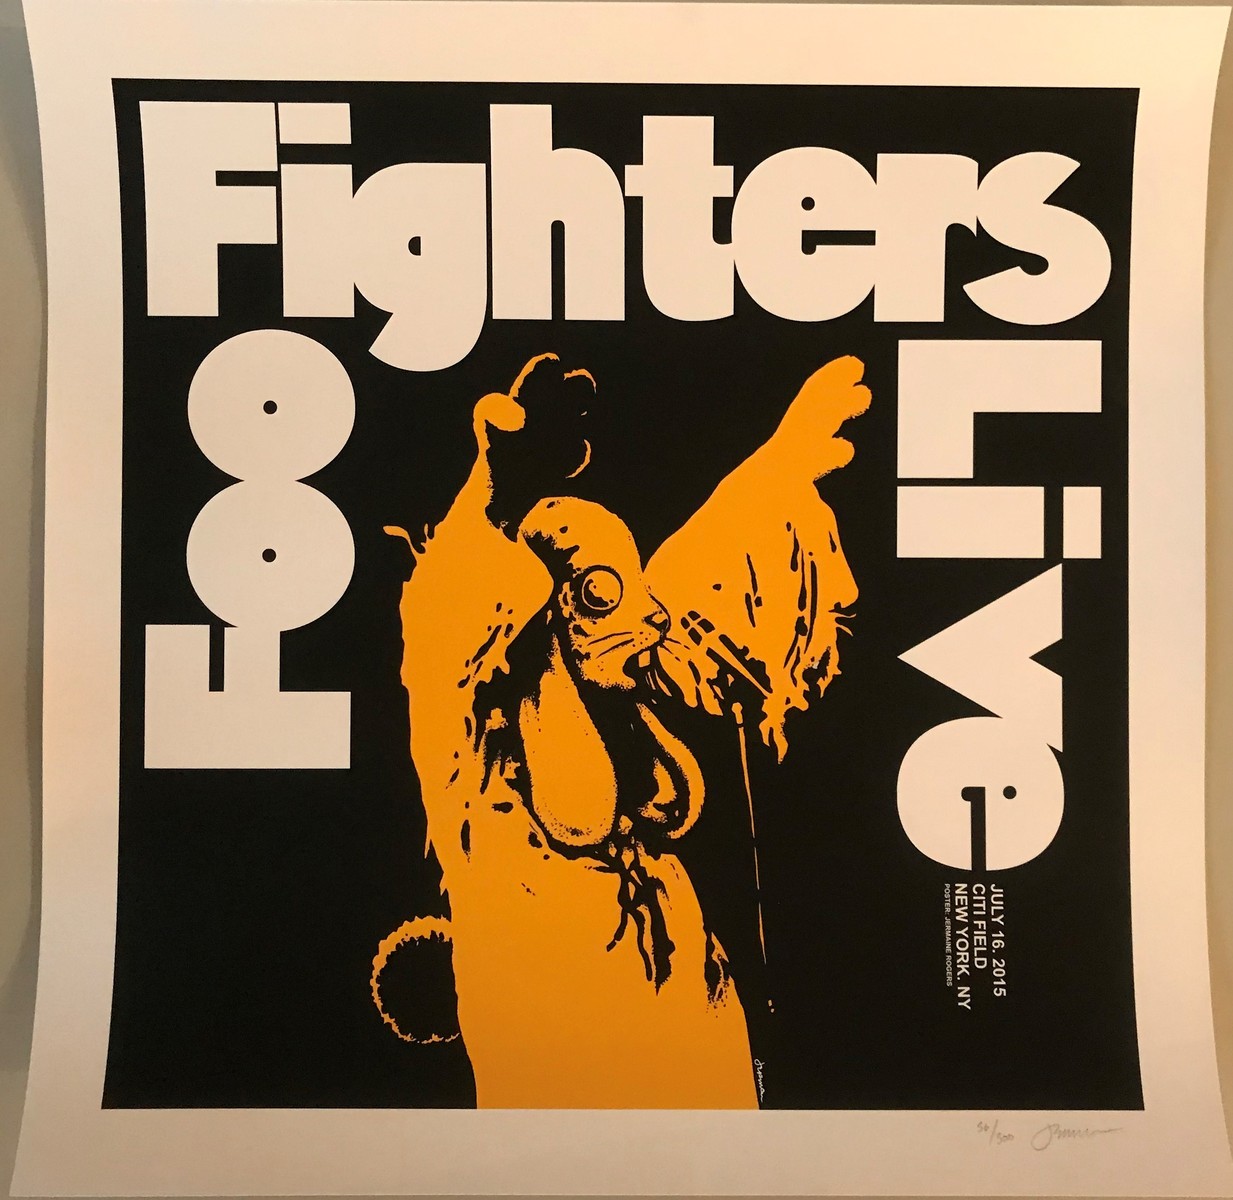 Foo Fighters Live 2015 Citi Field, New York, NY – Limited Edition Concert Poster by Jermaine Rogers